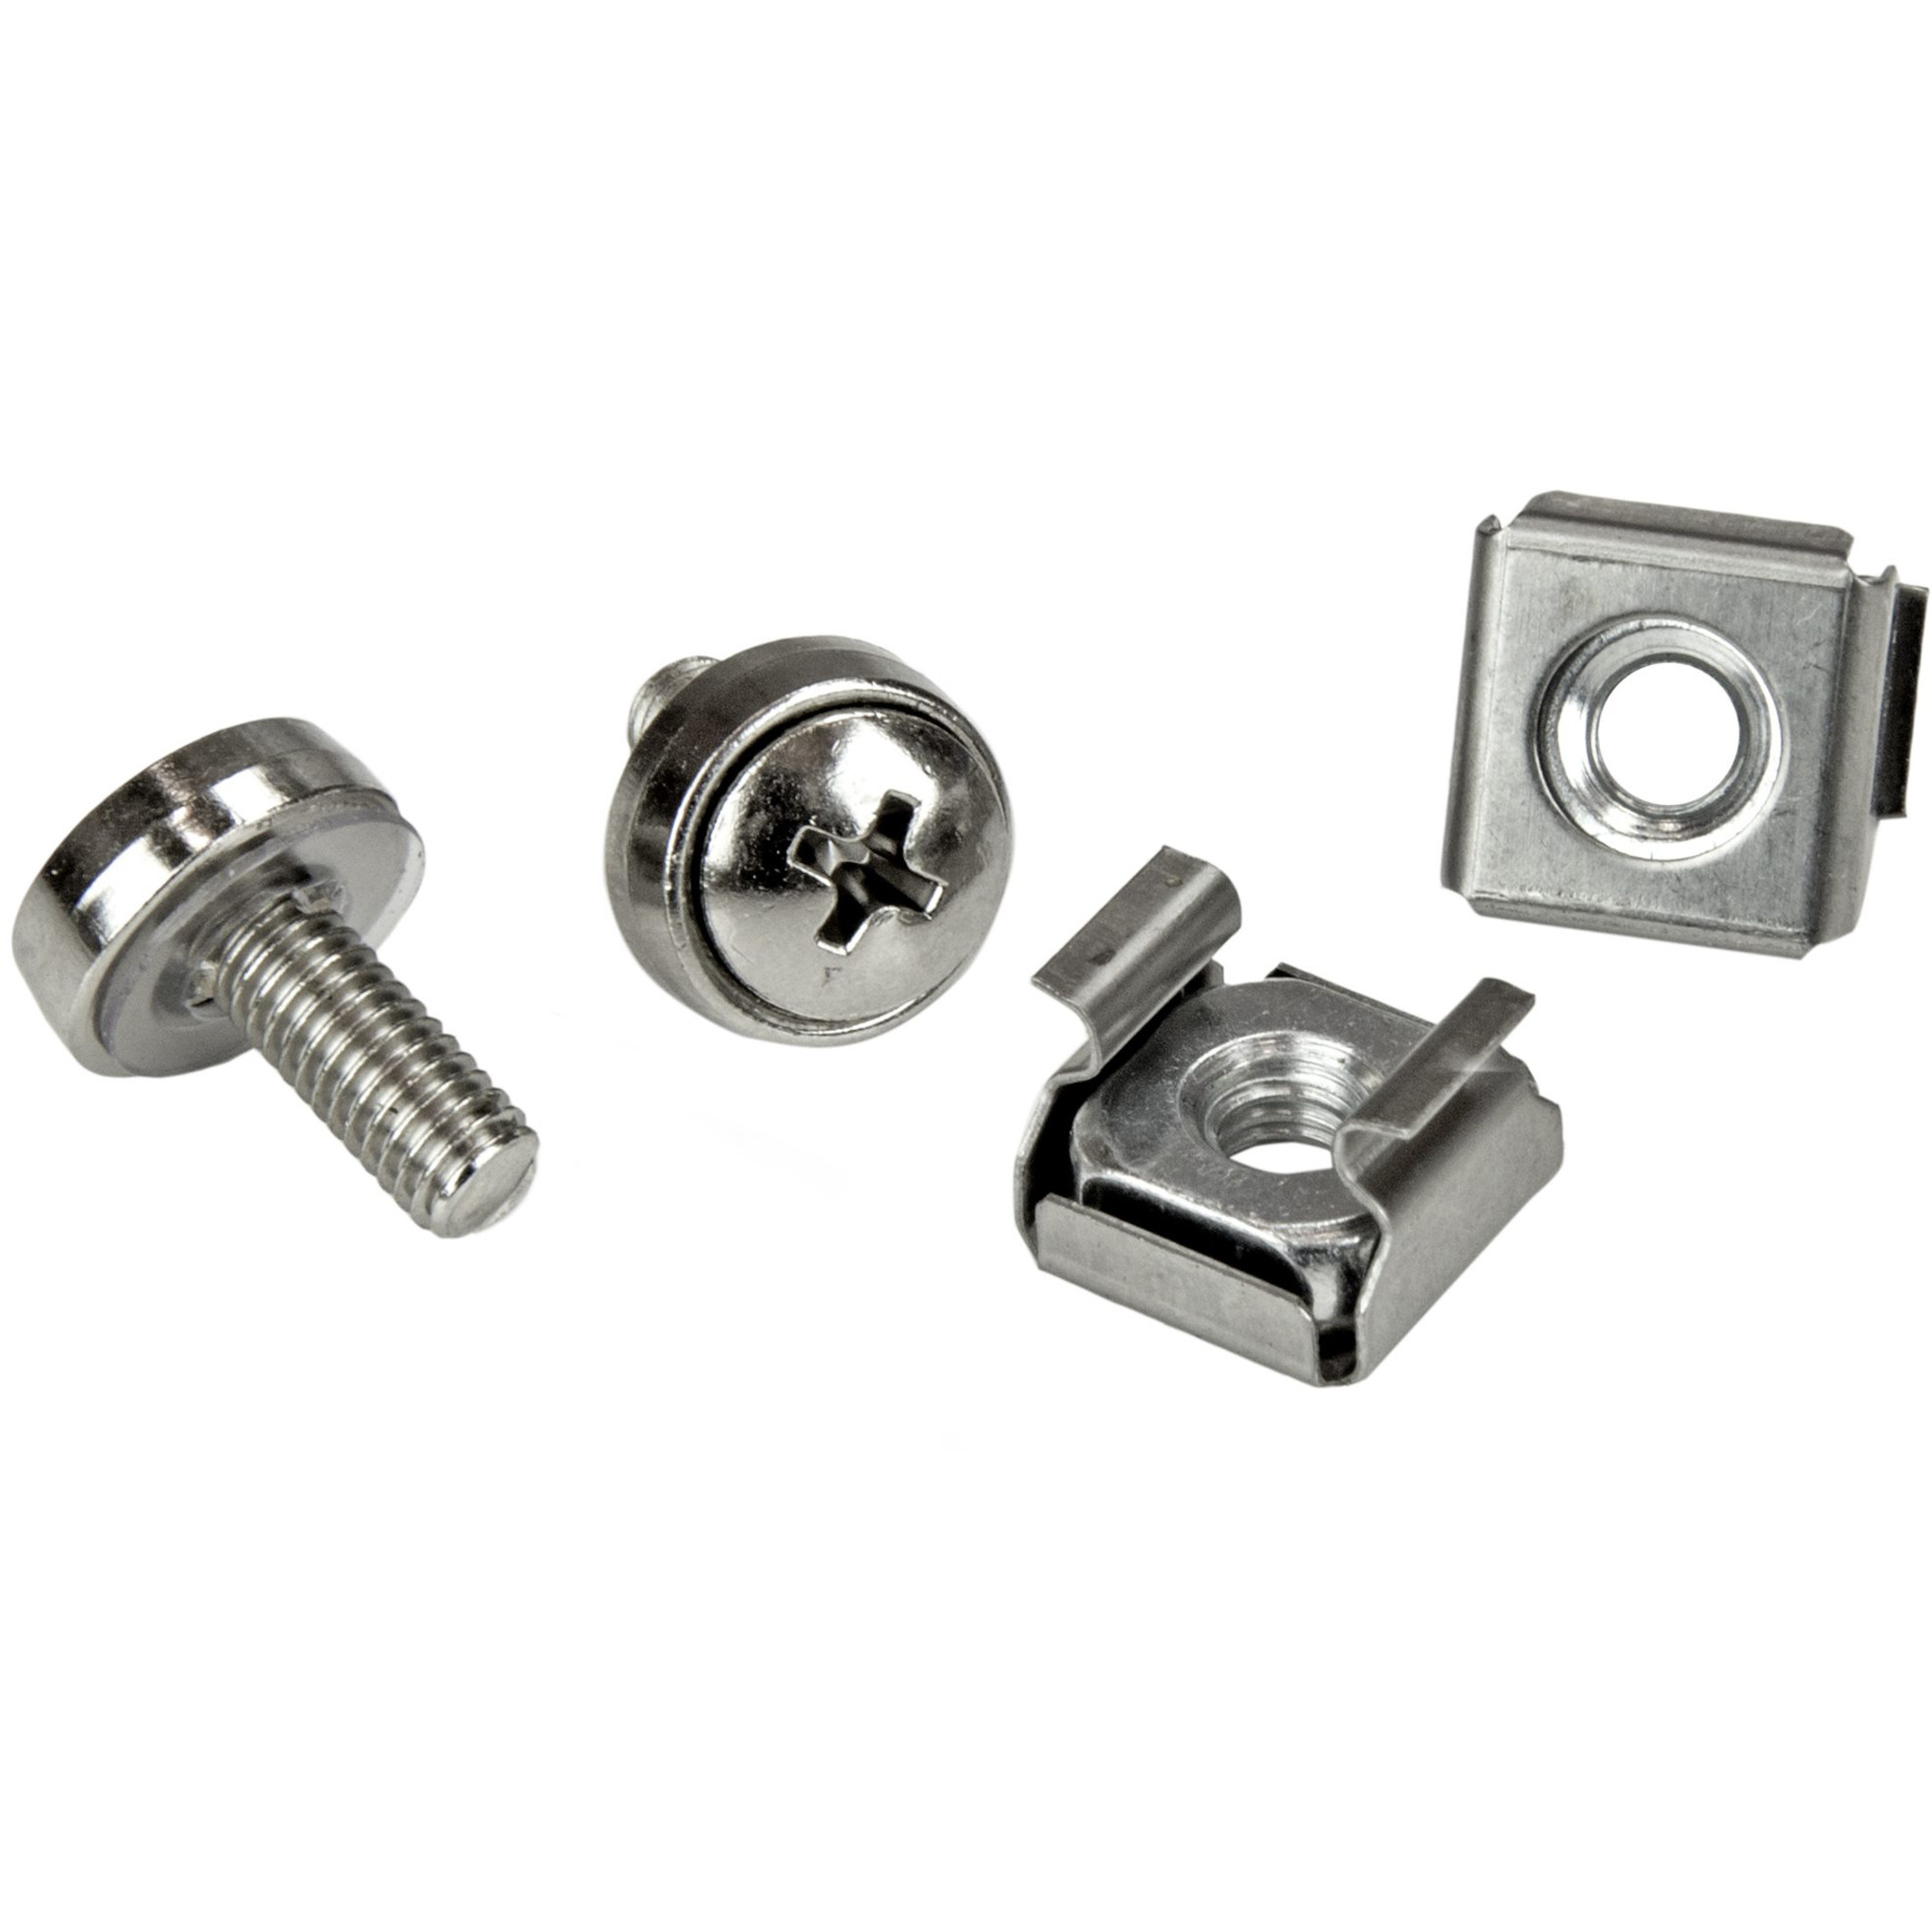 Startech .com 100 Pkg M5 Mounting Screws and Cage Nuts for Server Rack CabinetInstall your rack-mountable hardware securely with these hig… CABSCREWM52